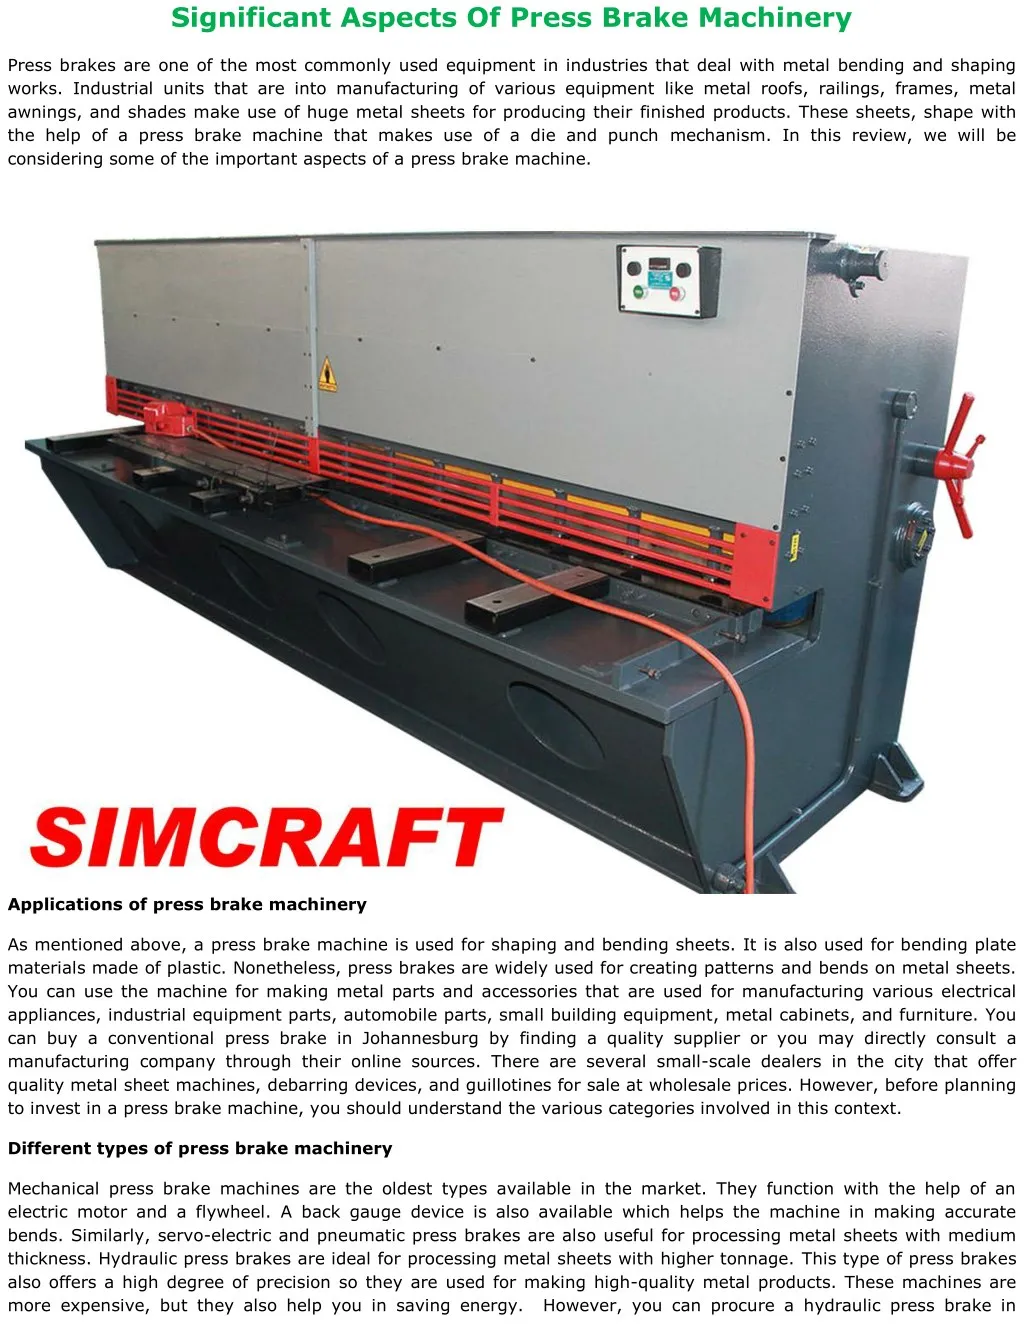 significant aspects of press brake machinery